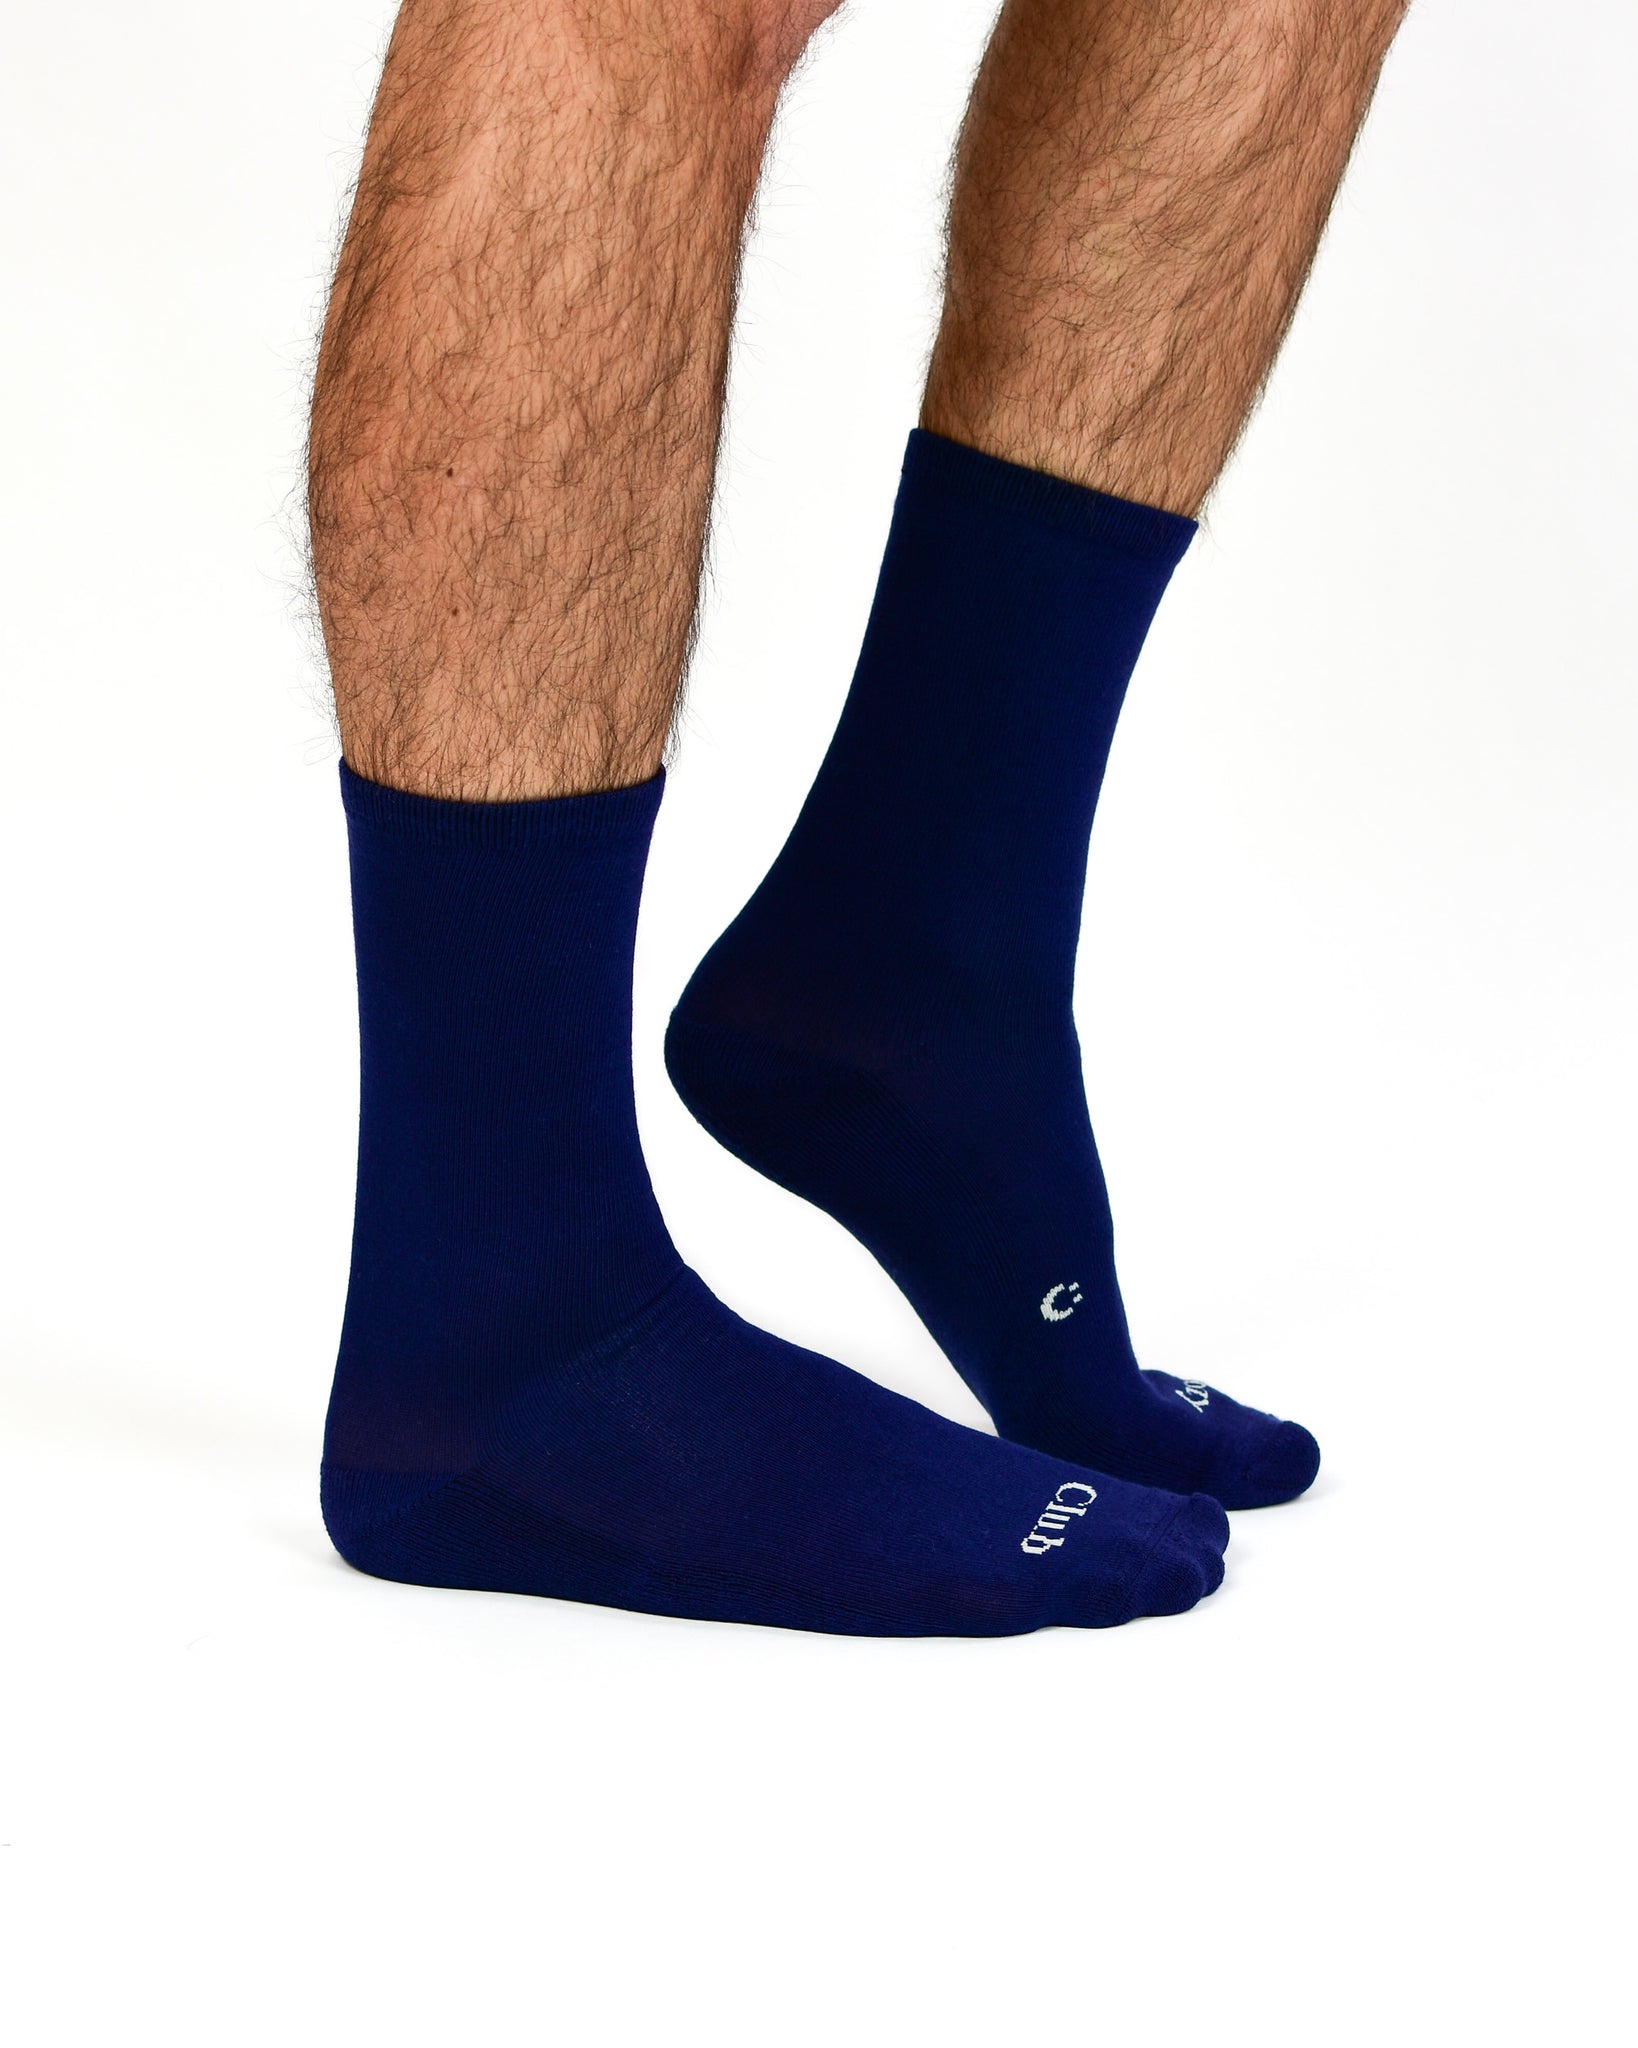 Everyday Crew Seamless Feel Sock 4 Pack (Adults) - Midnight/Cloud Multi